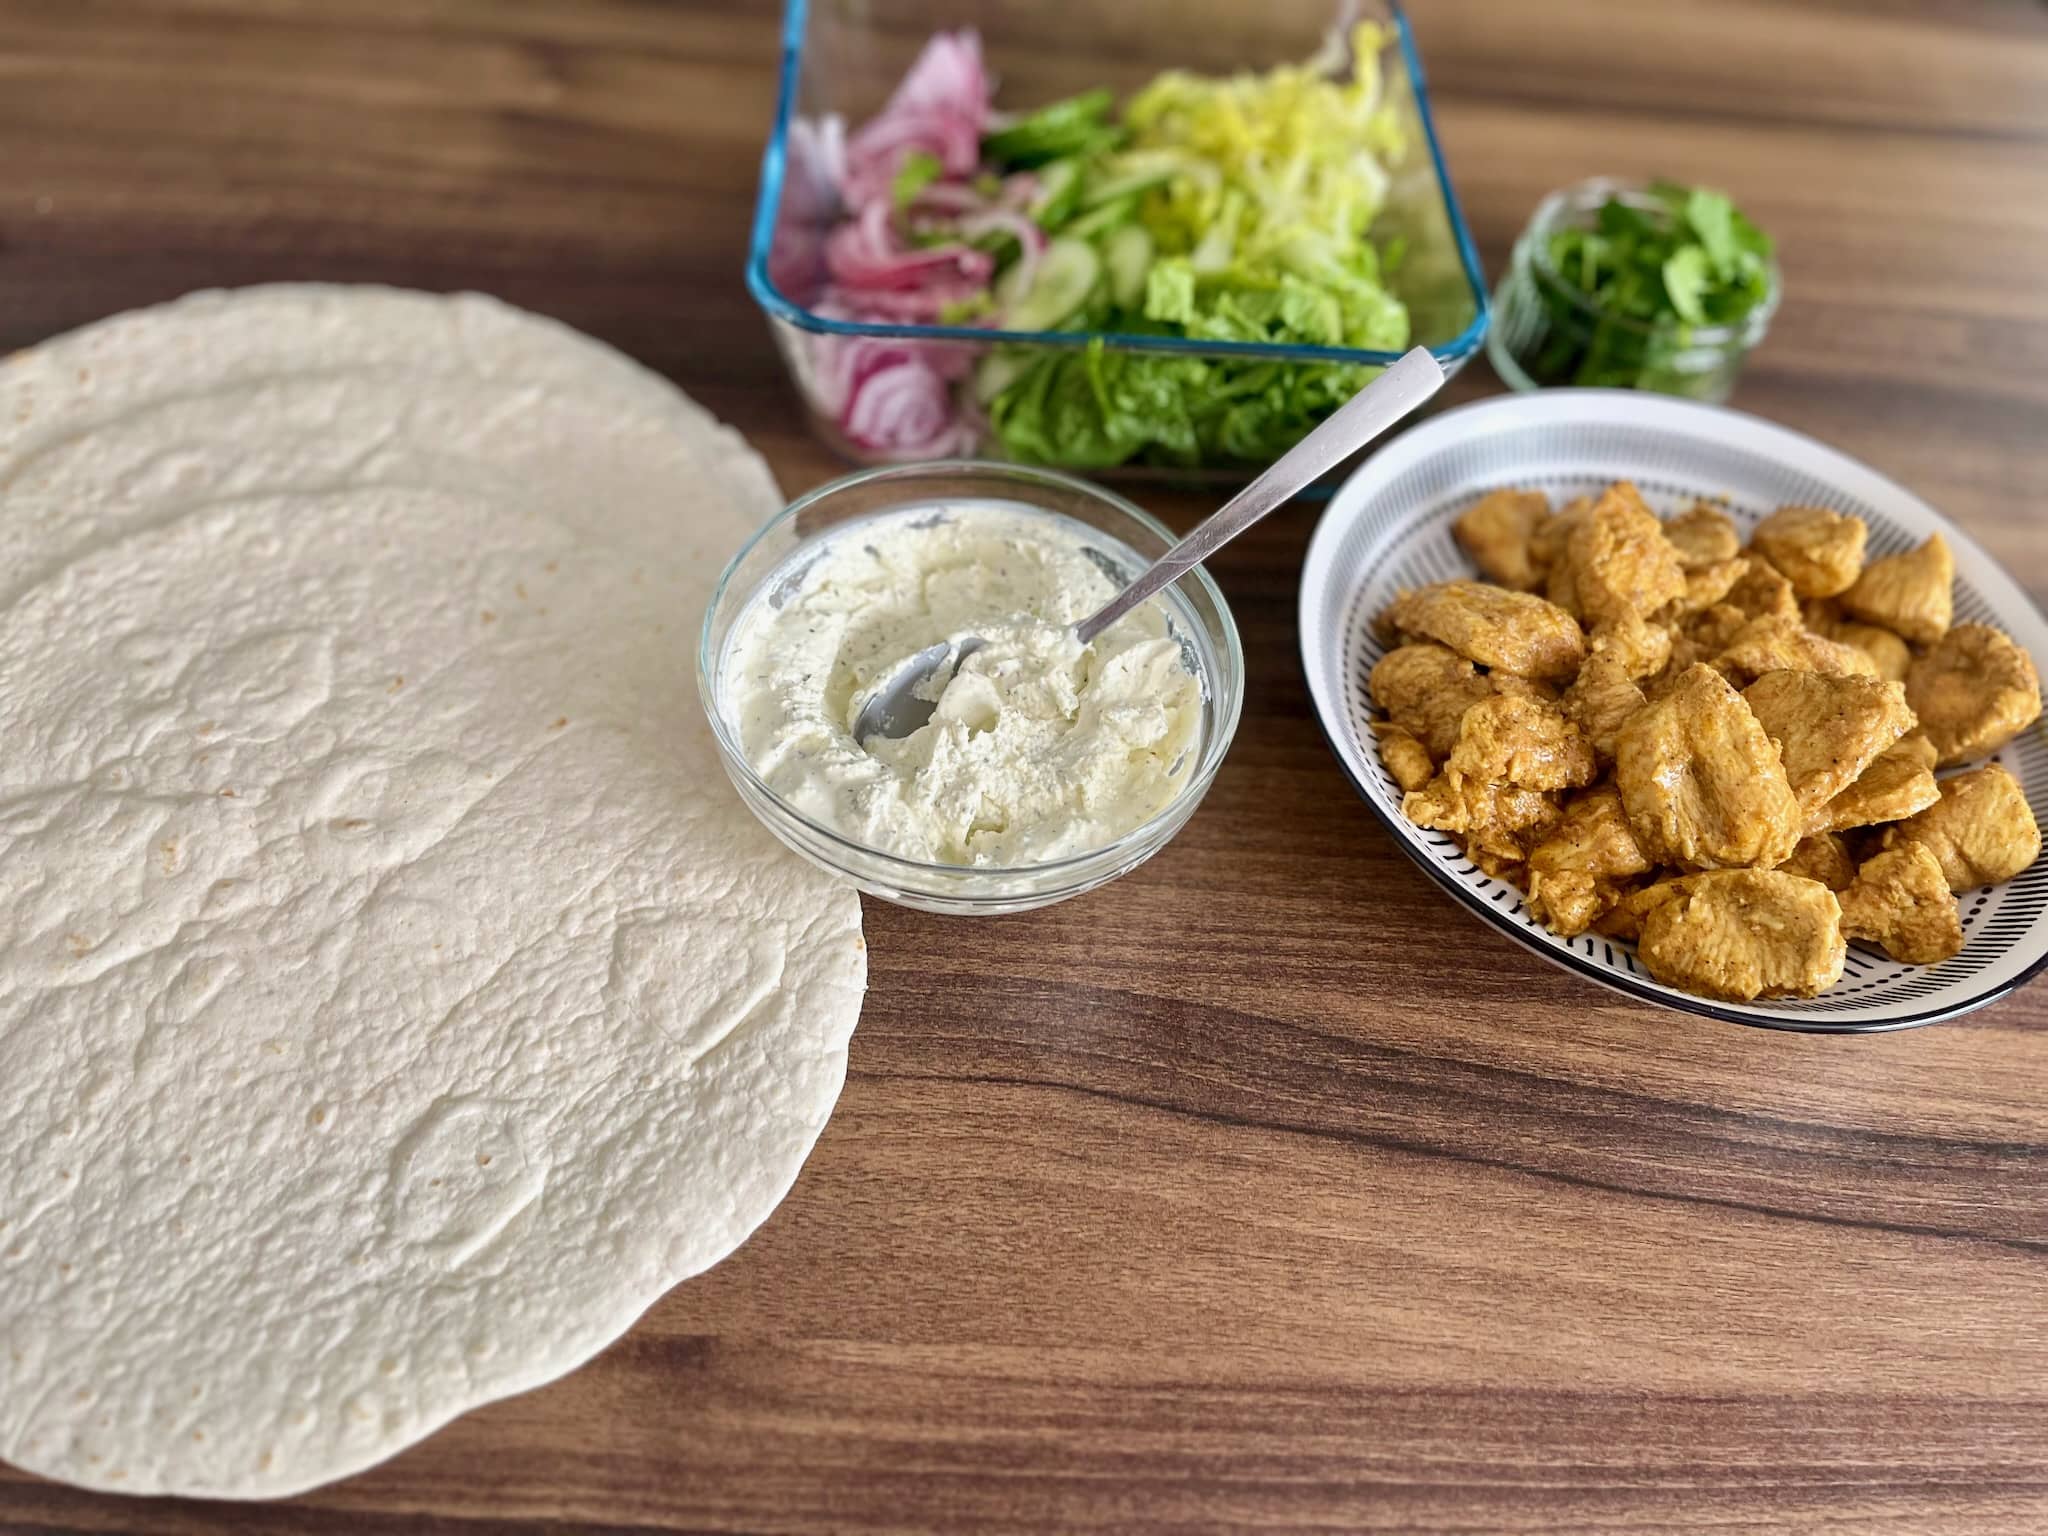 All ingredients ready to make Fit Chicken Kebab Wrap